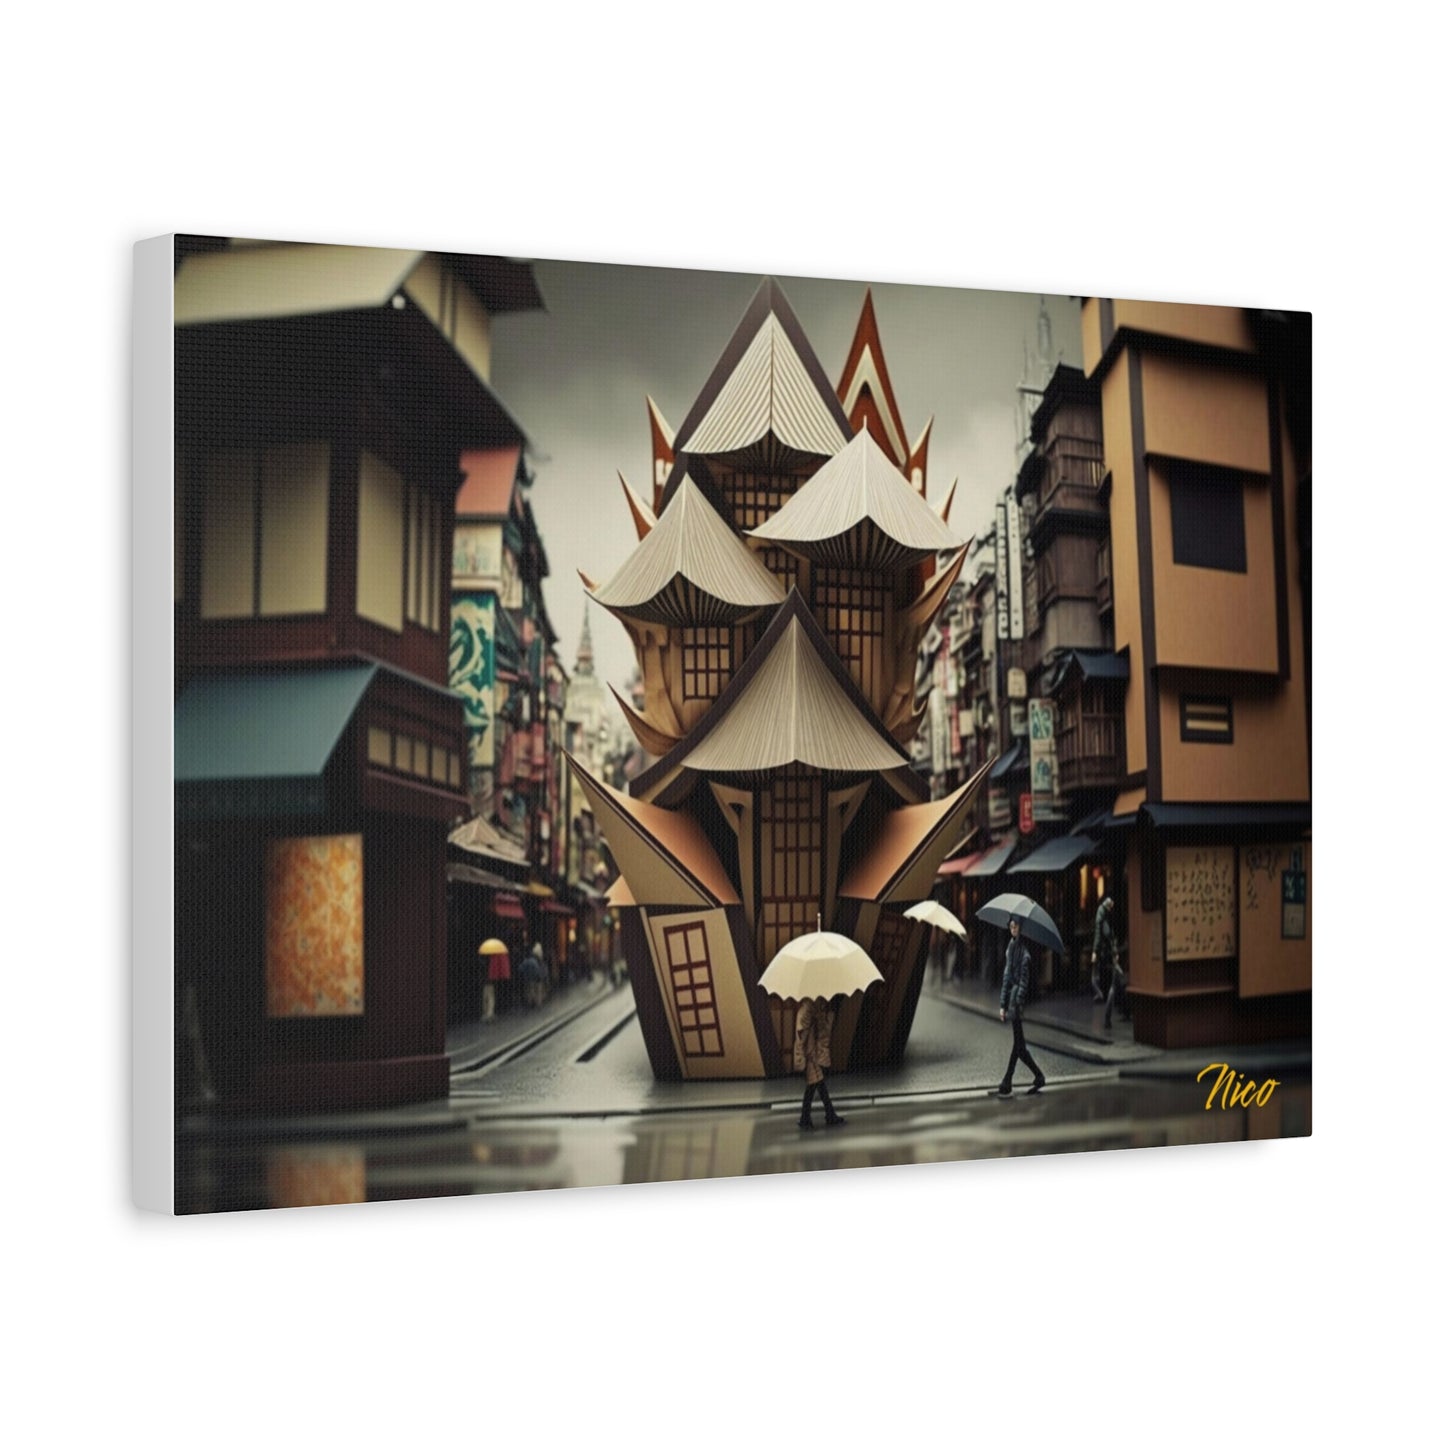 Oriental Rain Series Print #10 - Streched Matte Extended Canvas Print, 1.25" Thick